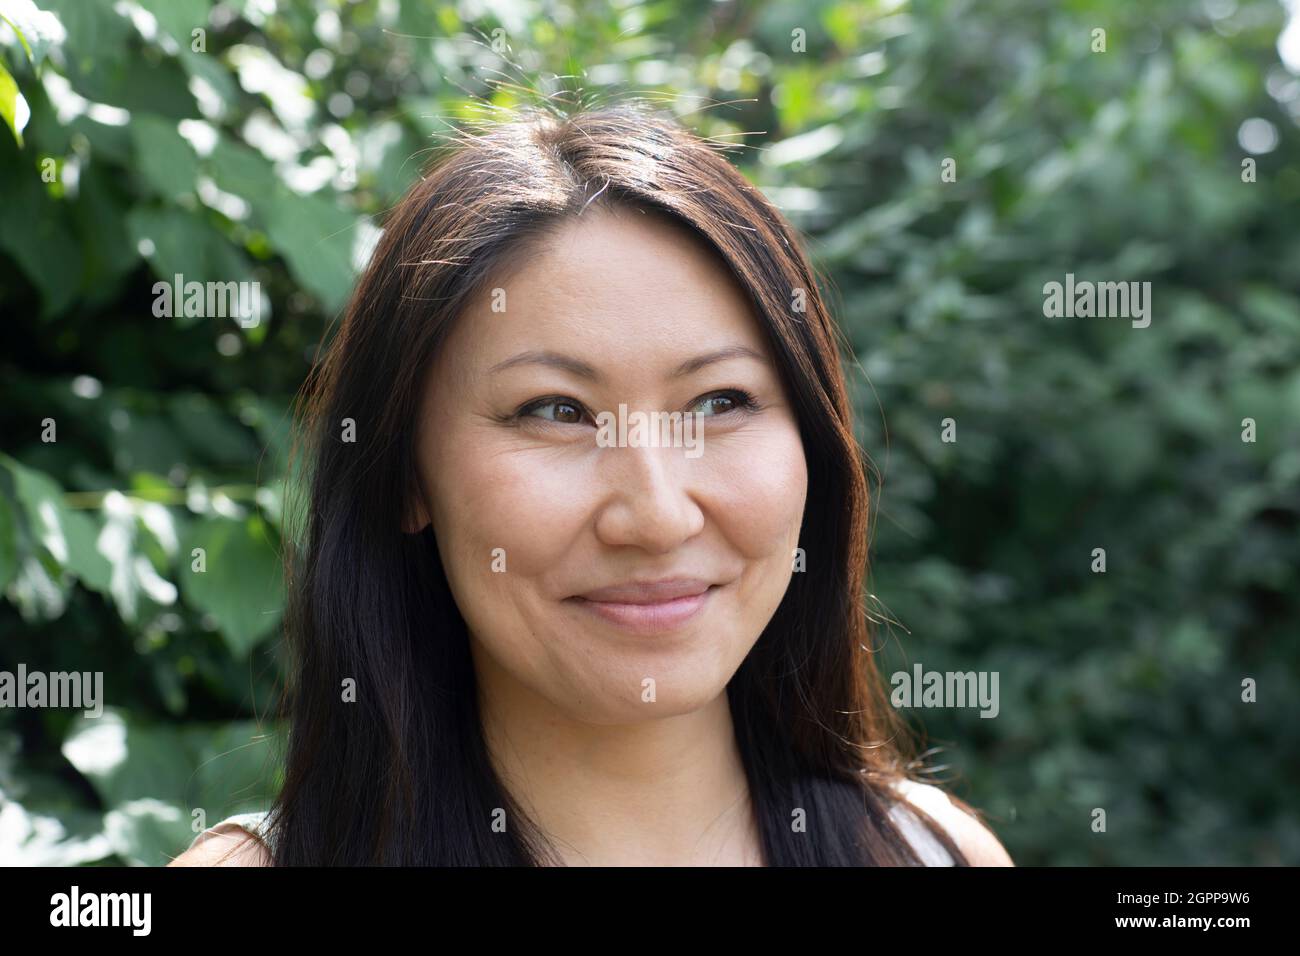 Germany, Freiburg, Portrait of smiling young woman outdoors Stock Photo